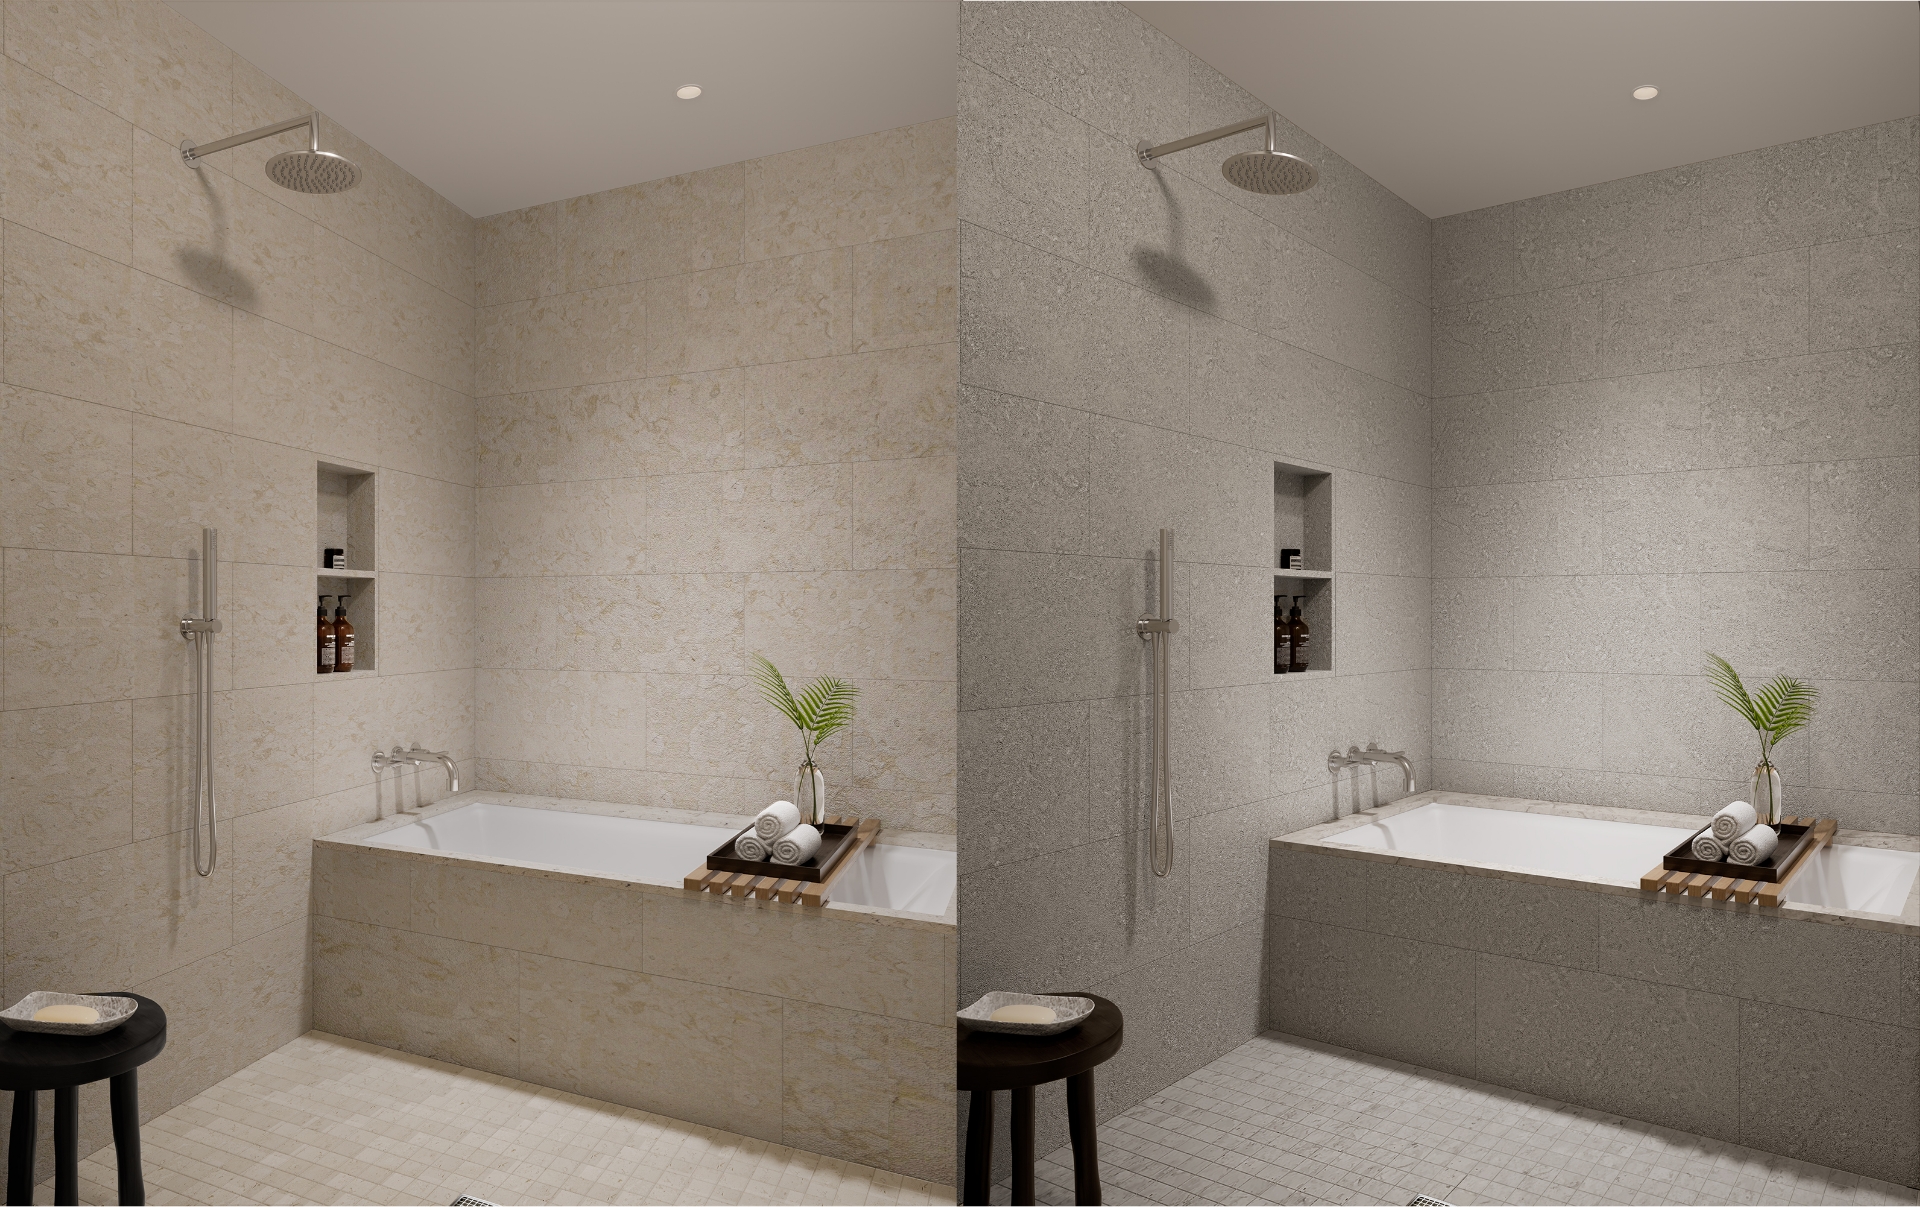 Side by side view of a shower and tub combination in a light and dark color scheme comparison.